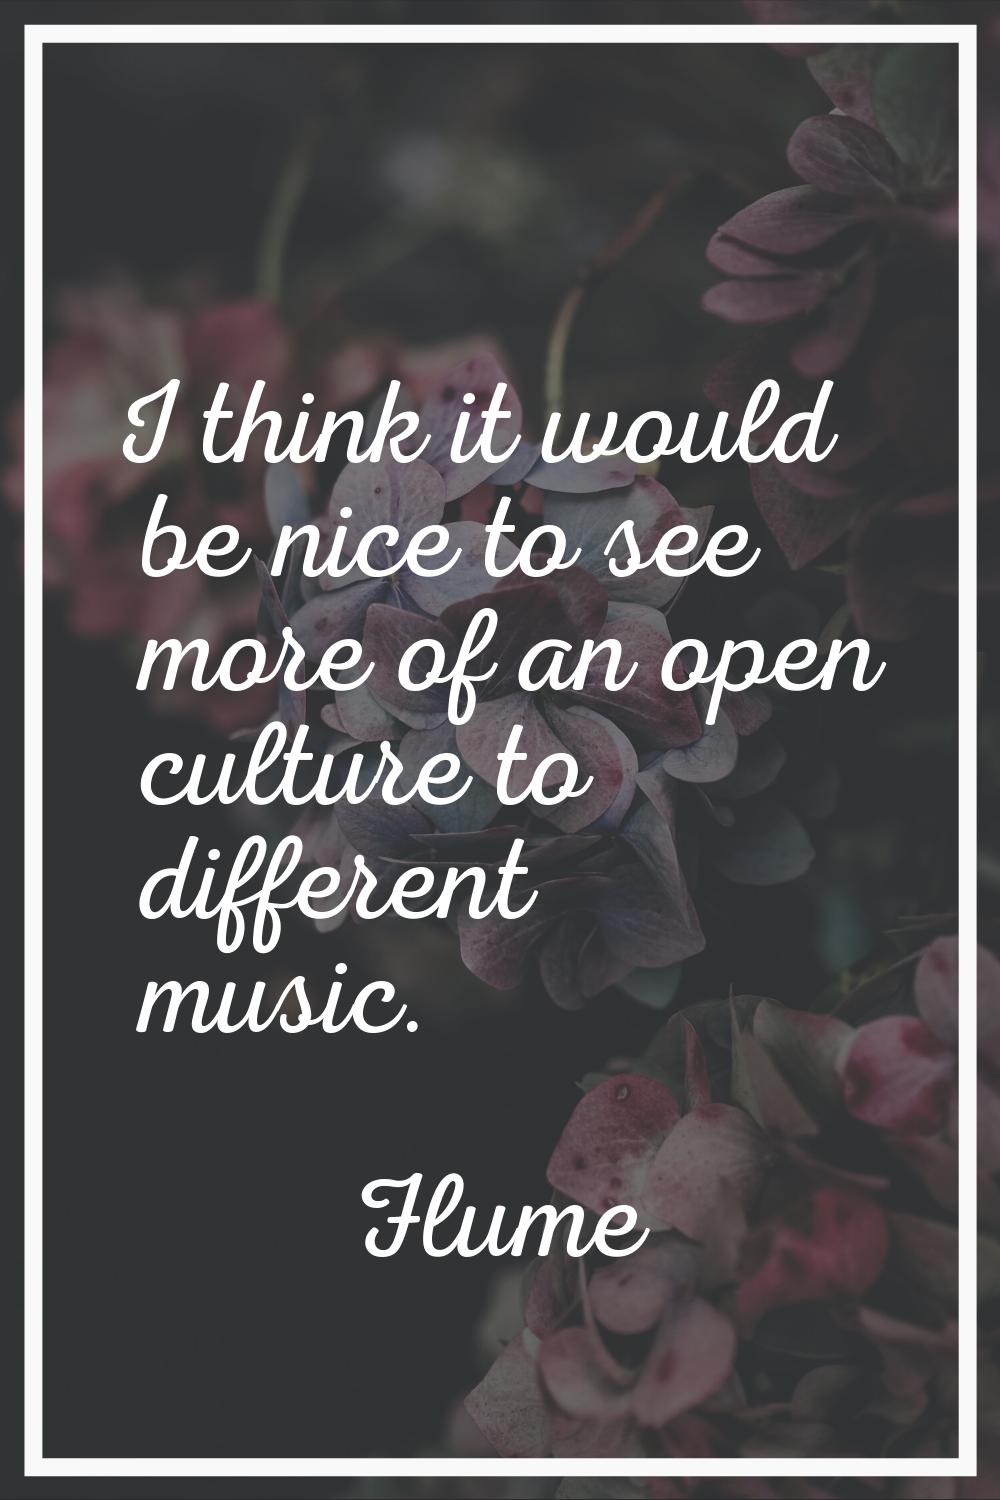 I think it would be nice to see more of an open culture to different music.